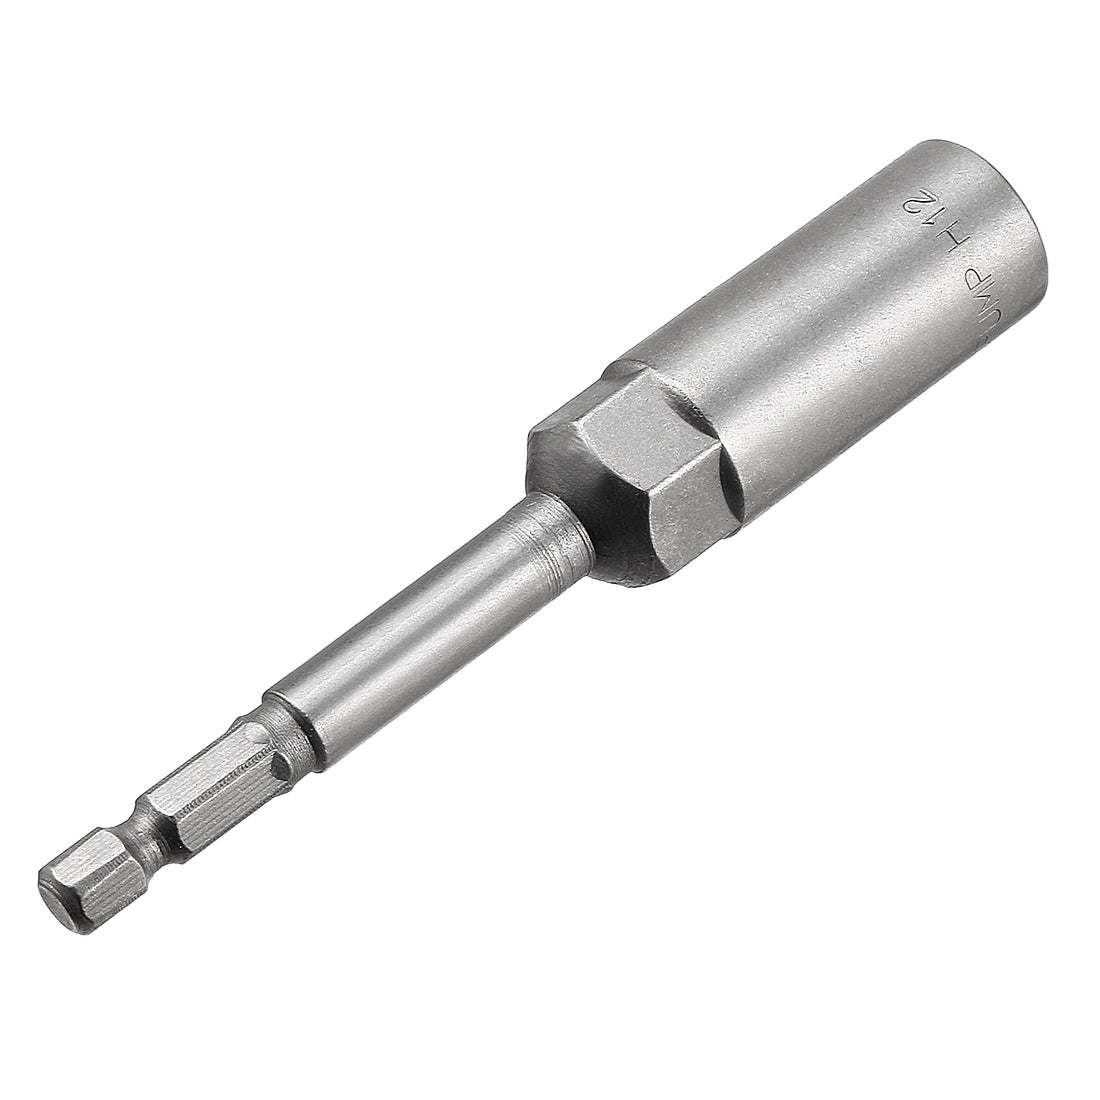 uxcell Uxcell Quick-Change Hex Shank Nut Setter Driver Drill Bit, Metric, Non-magnetic